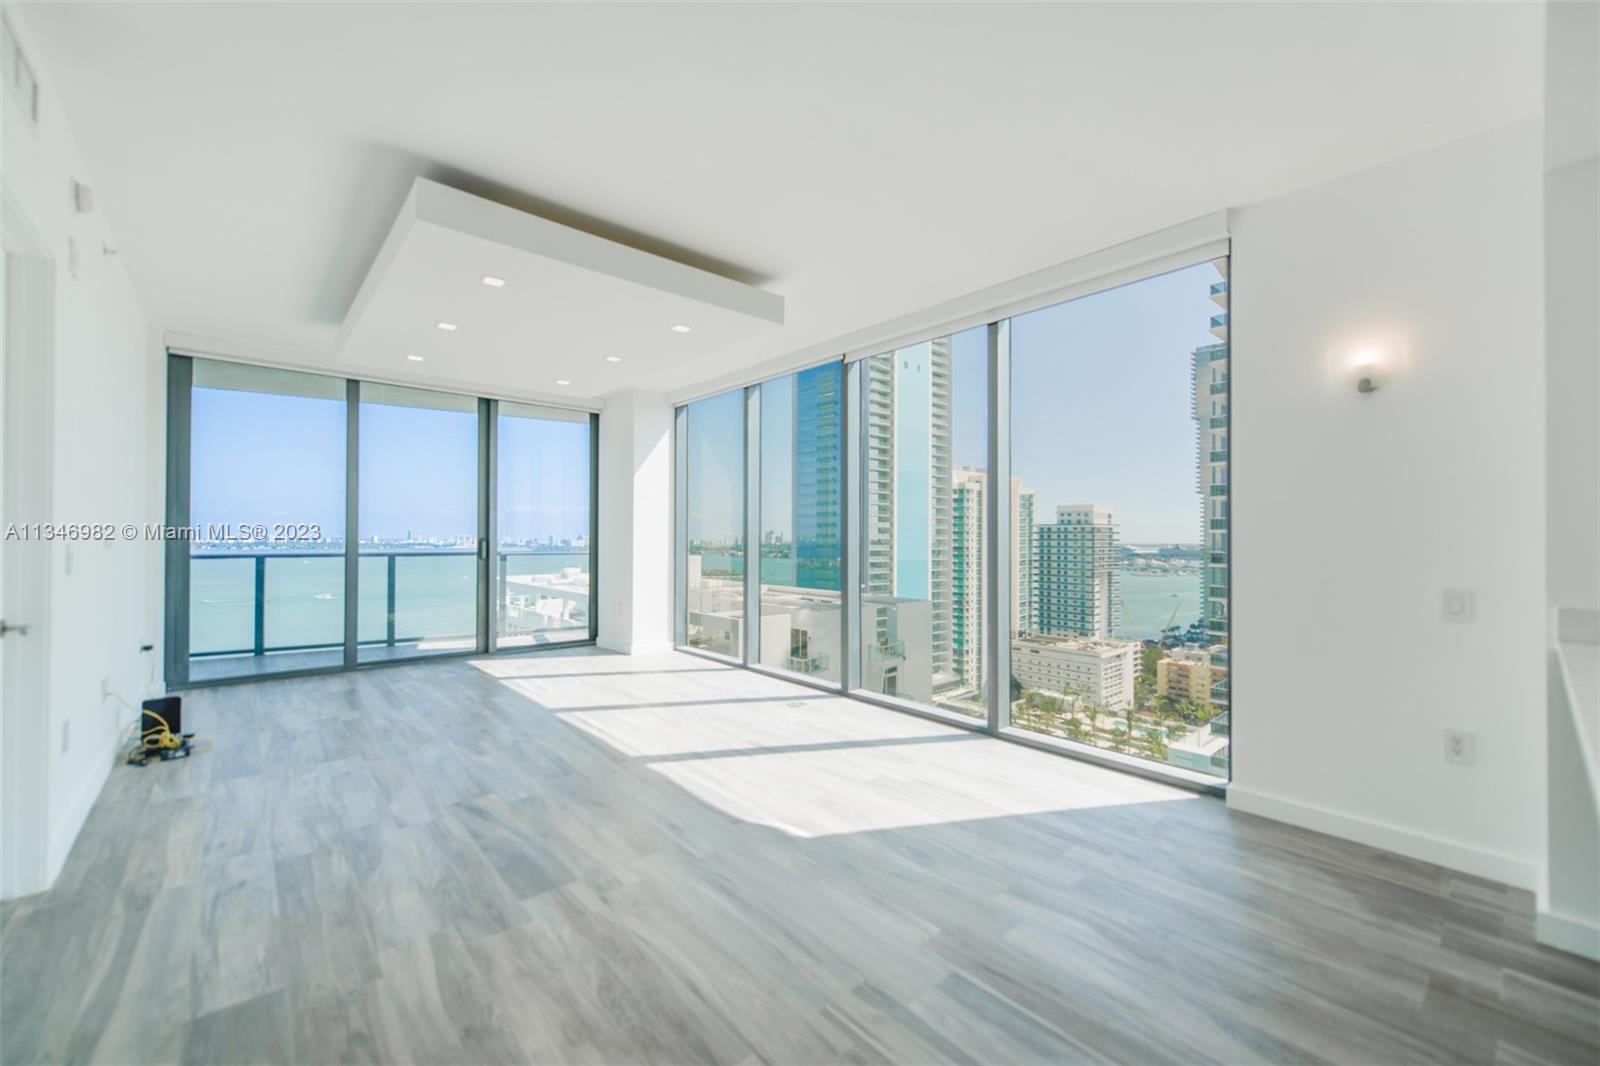 Welcome to this stunning 3BED condo unit with a water view in Edgewater Miami! This gorgeous propert